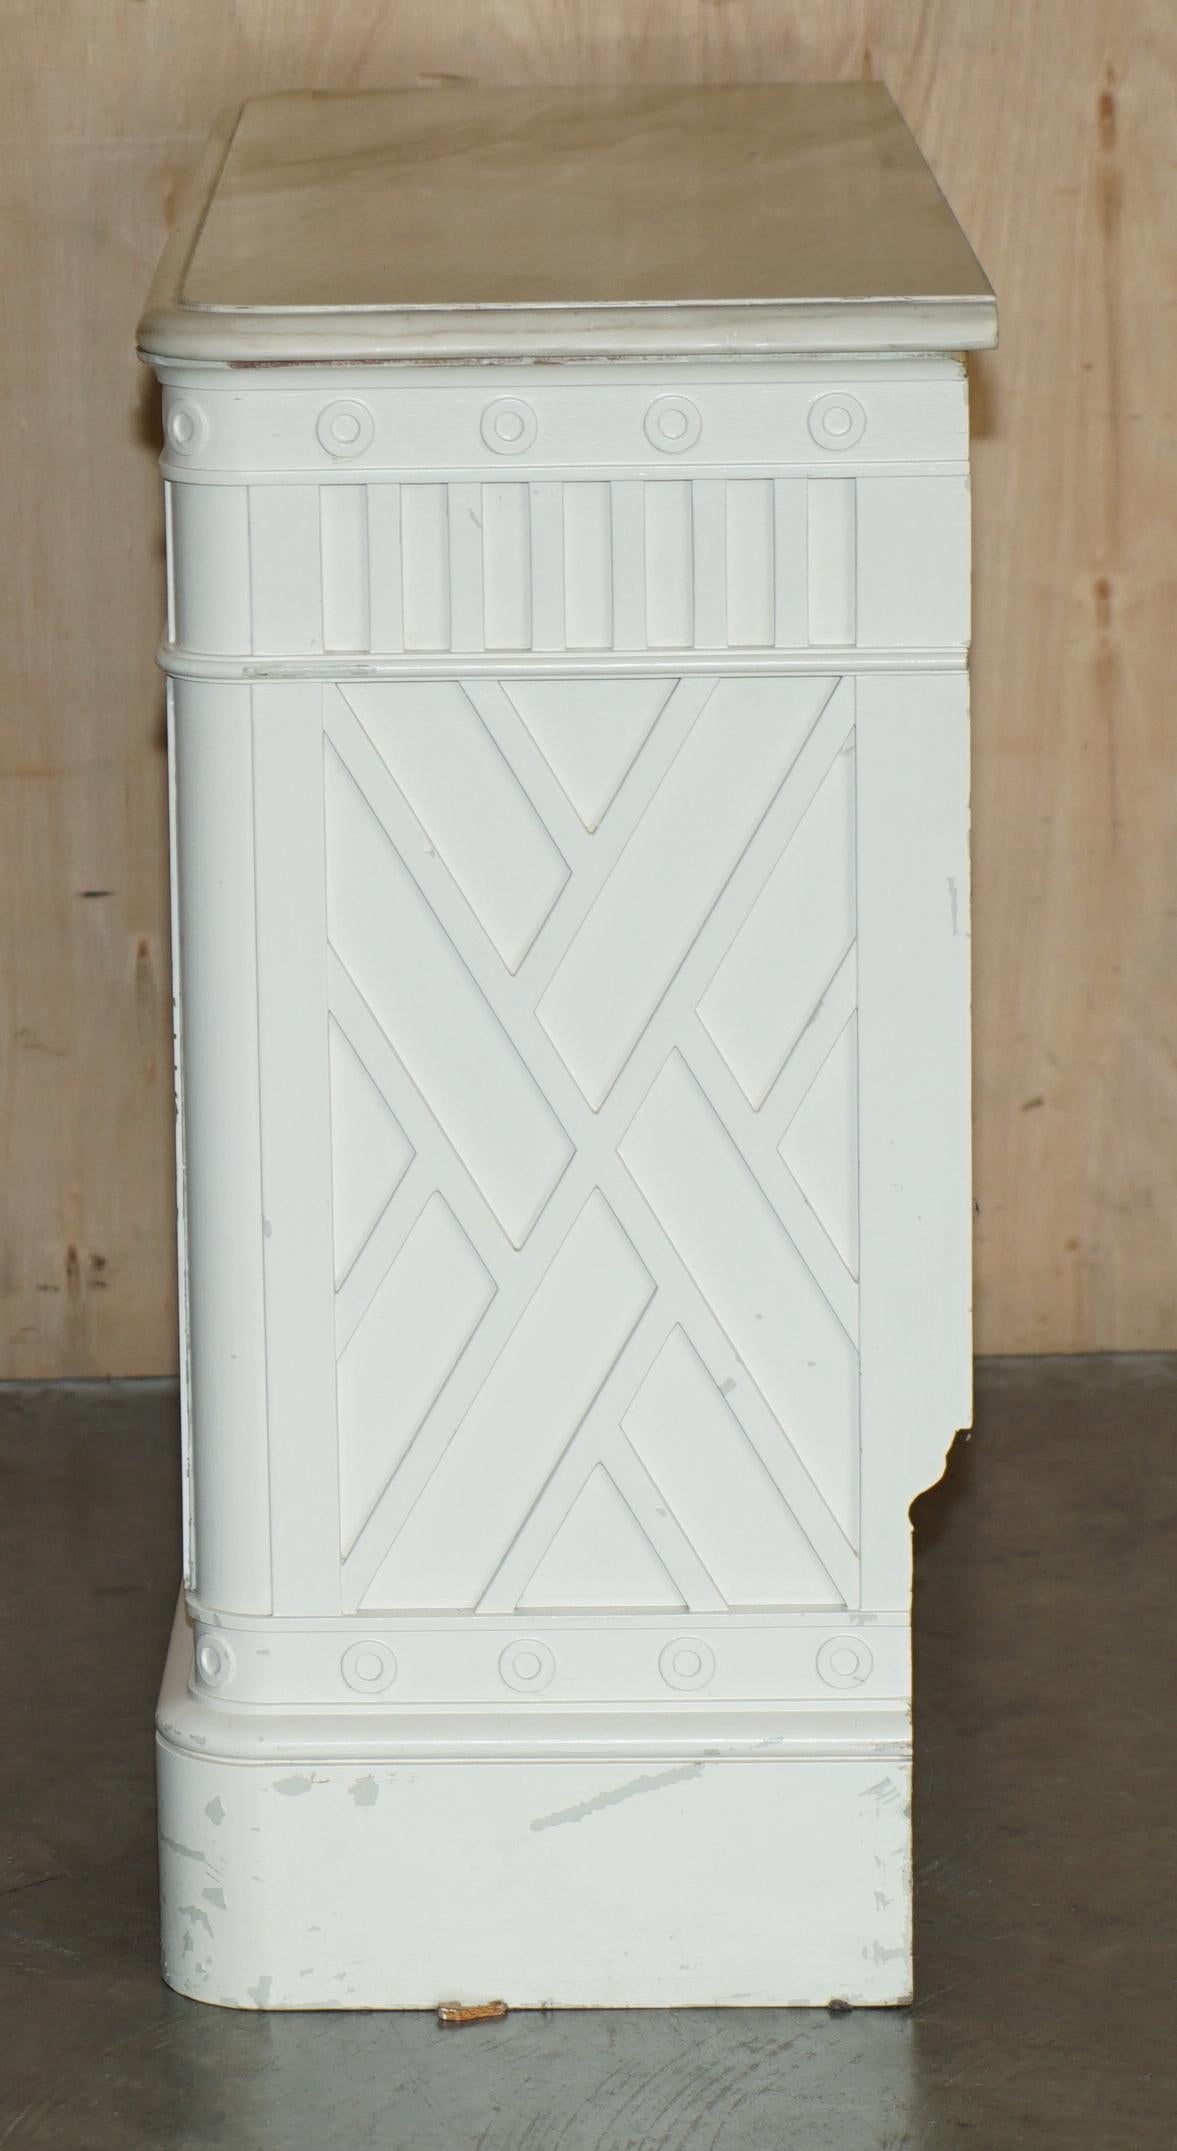 PAIR OF ViNTAGE ITALIAN CARRARA MARBLE TOPPED RADIATOR COVERS REMOVABLE FRONTS For Sale 4